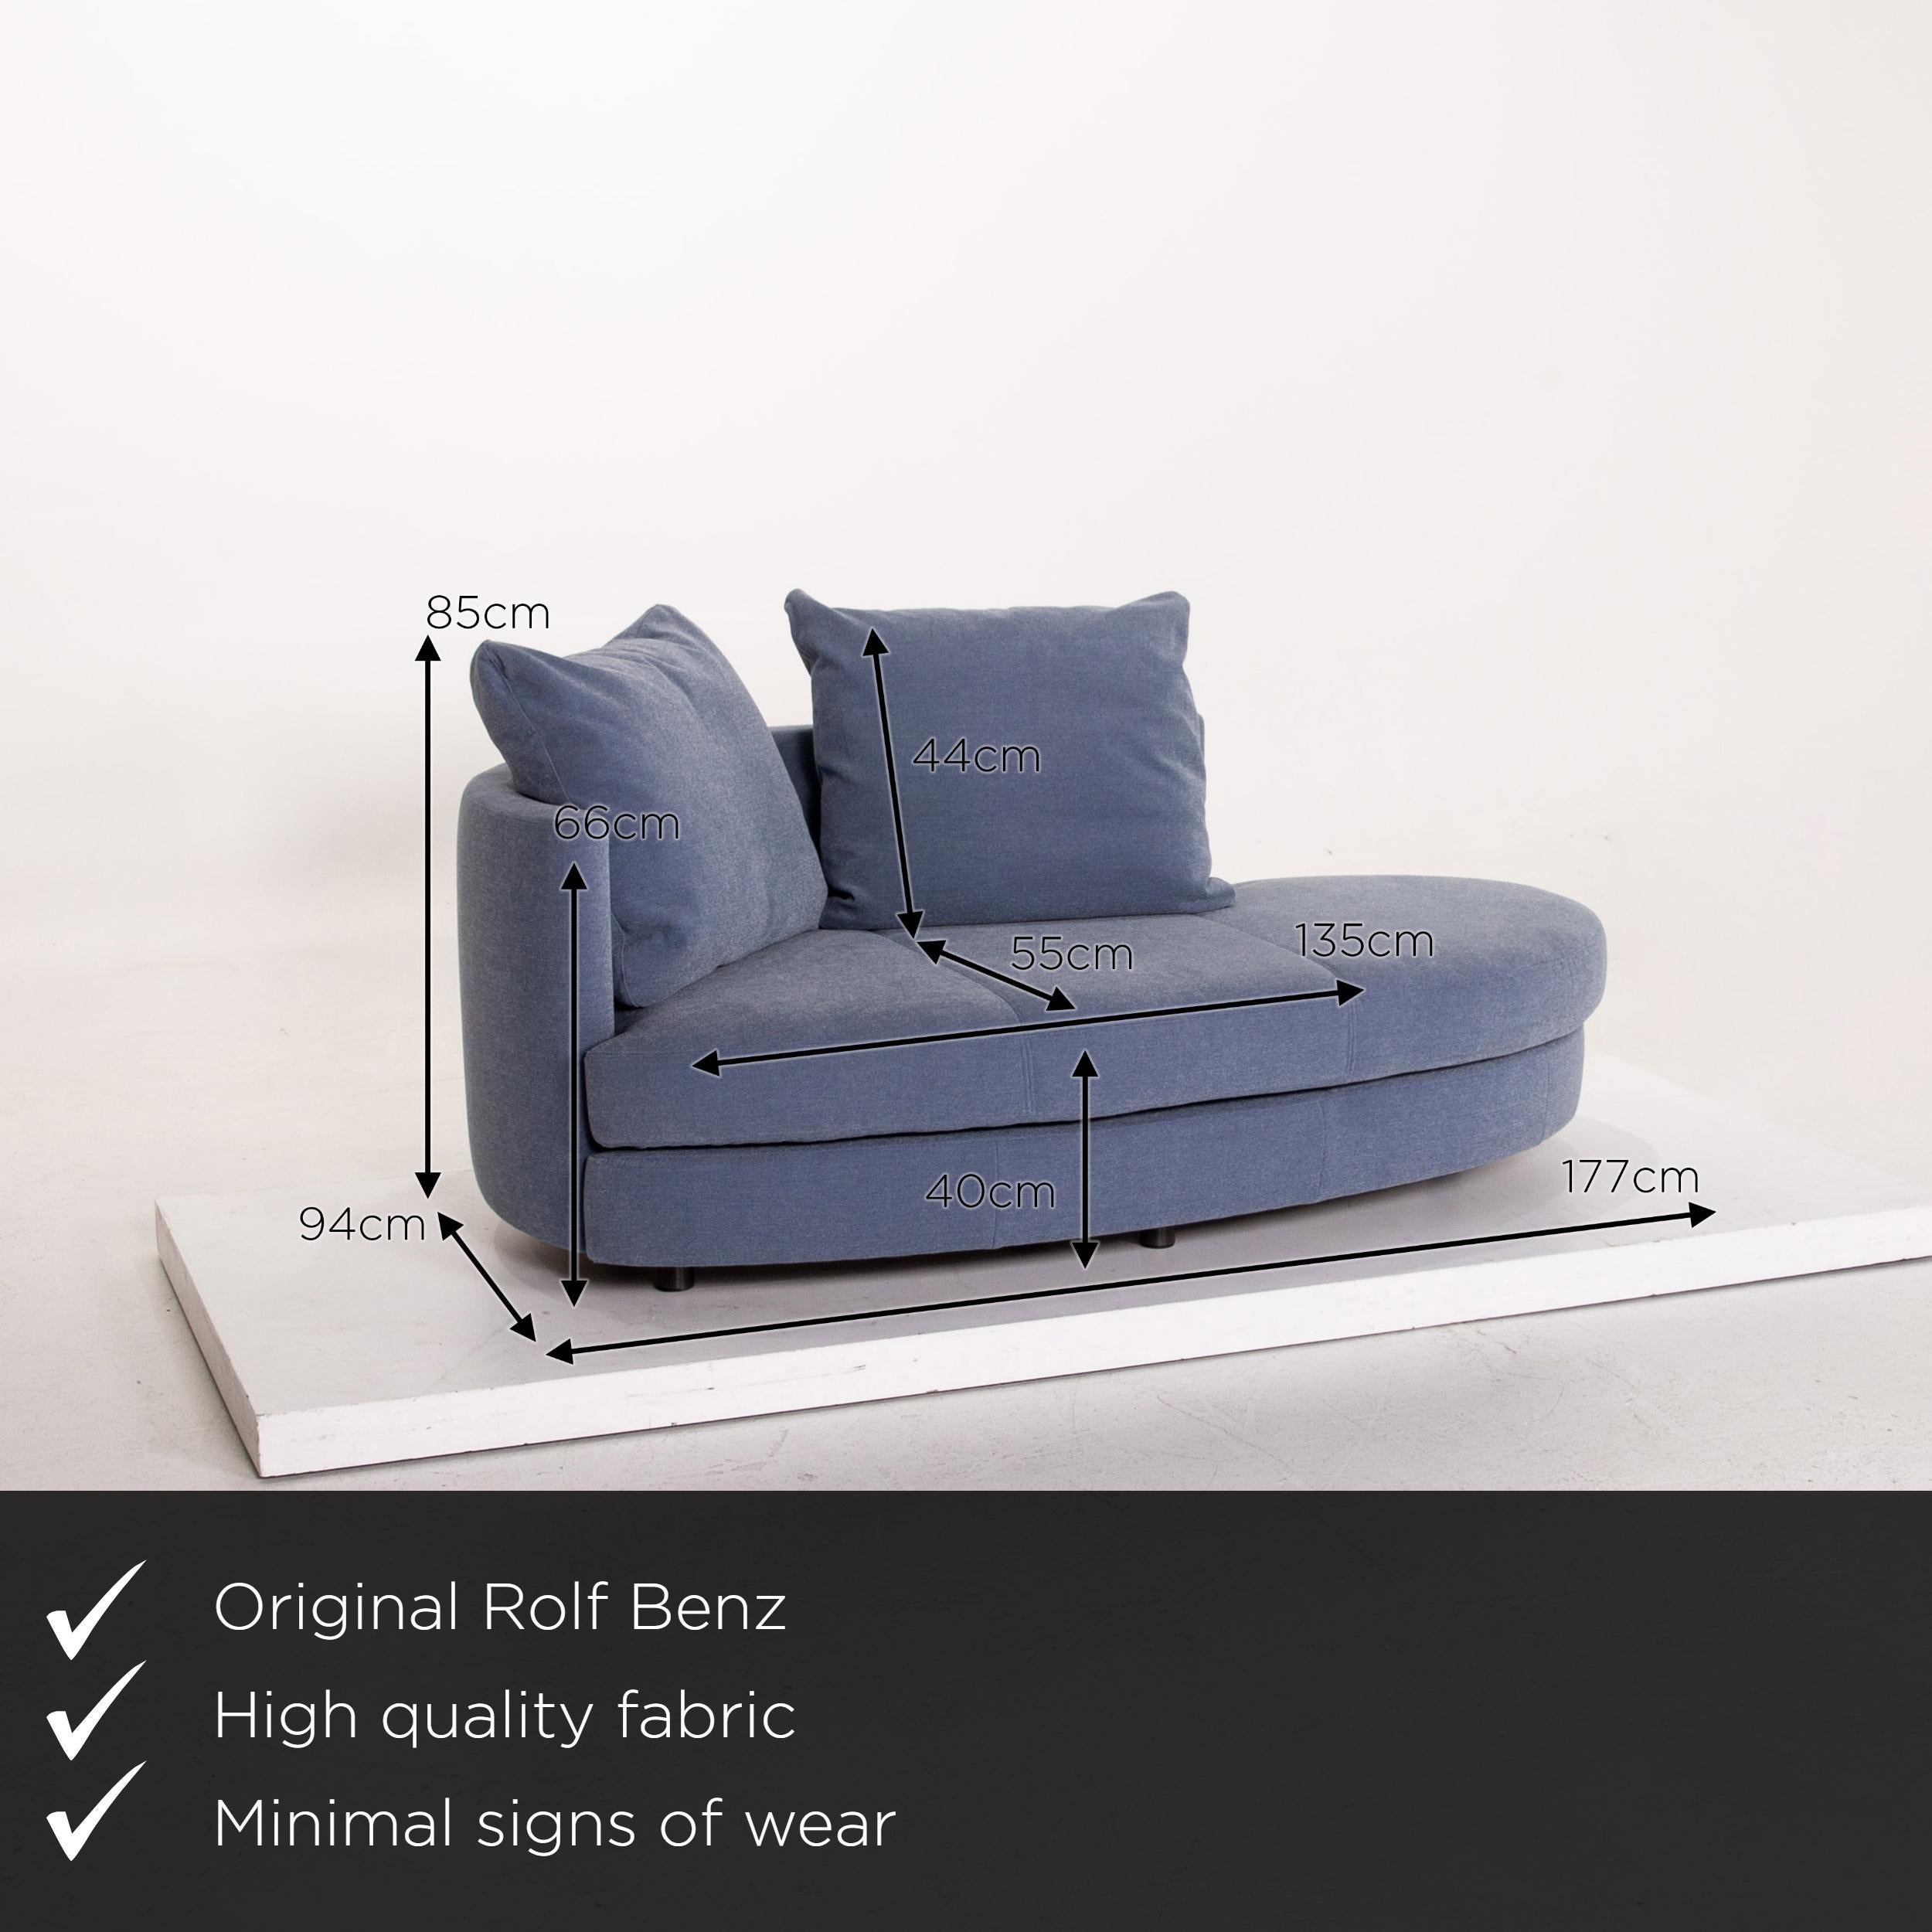 We present to you a Rolf Benz fabric sofa blue two-seat couch.


 Product measurements in centimeters:
 

Depth 94
Width 177
Height 85
Seat height 40
Rest height 66
Seat depth 55
Seat width 135
Back height 44.
 